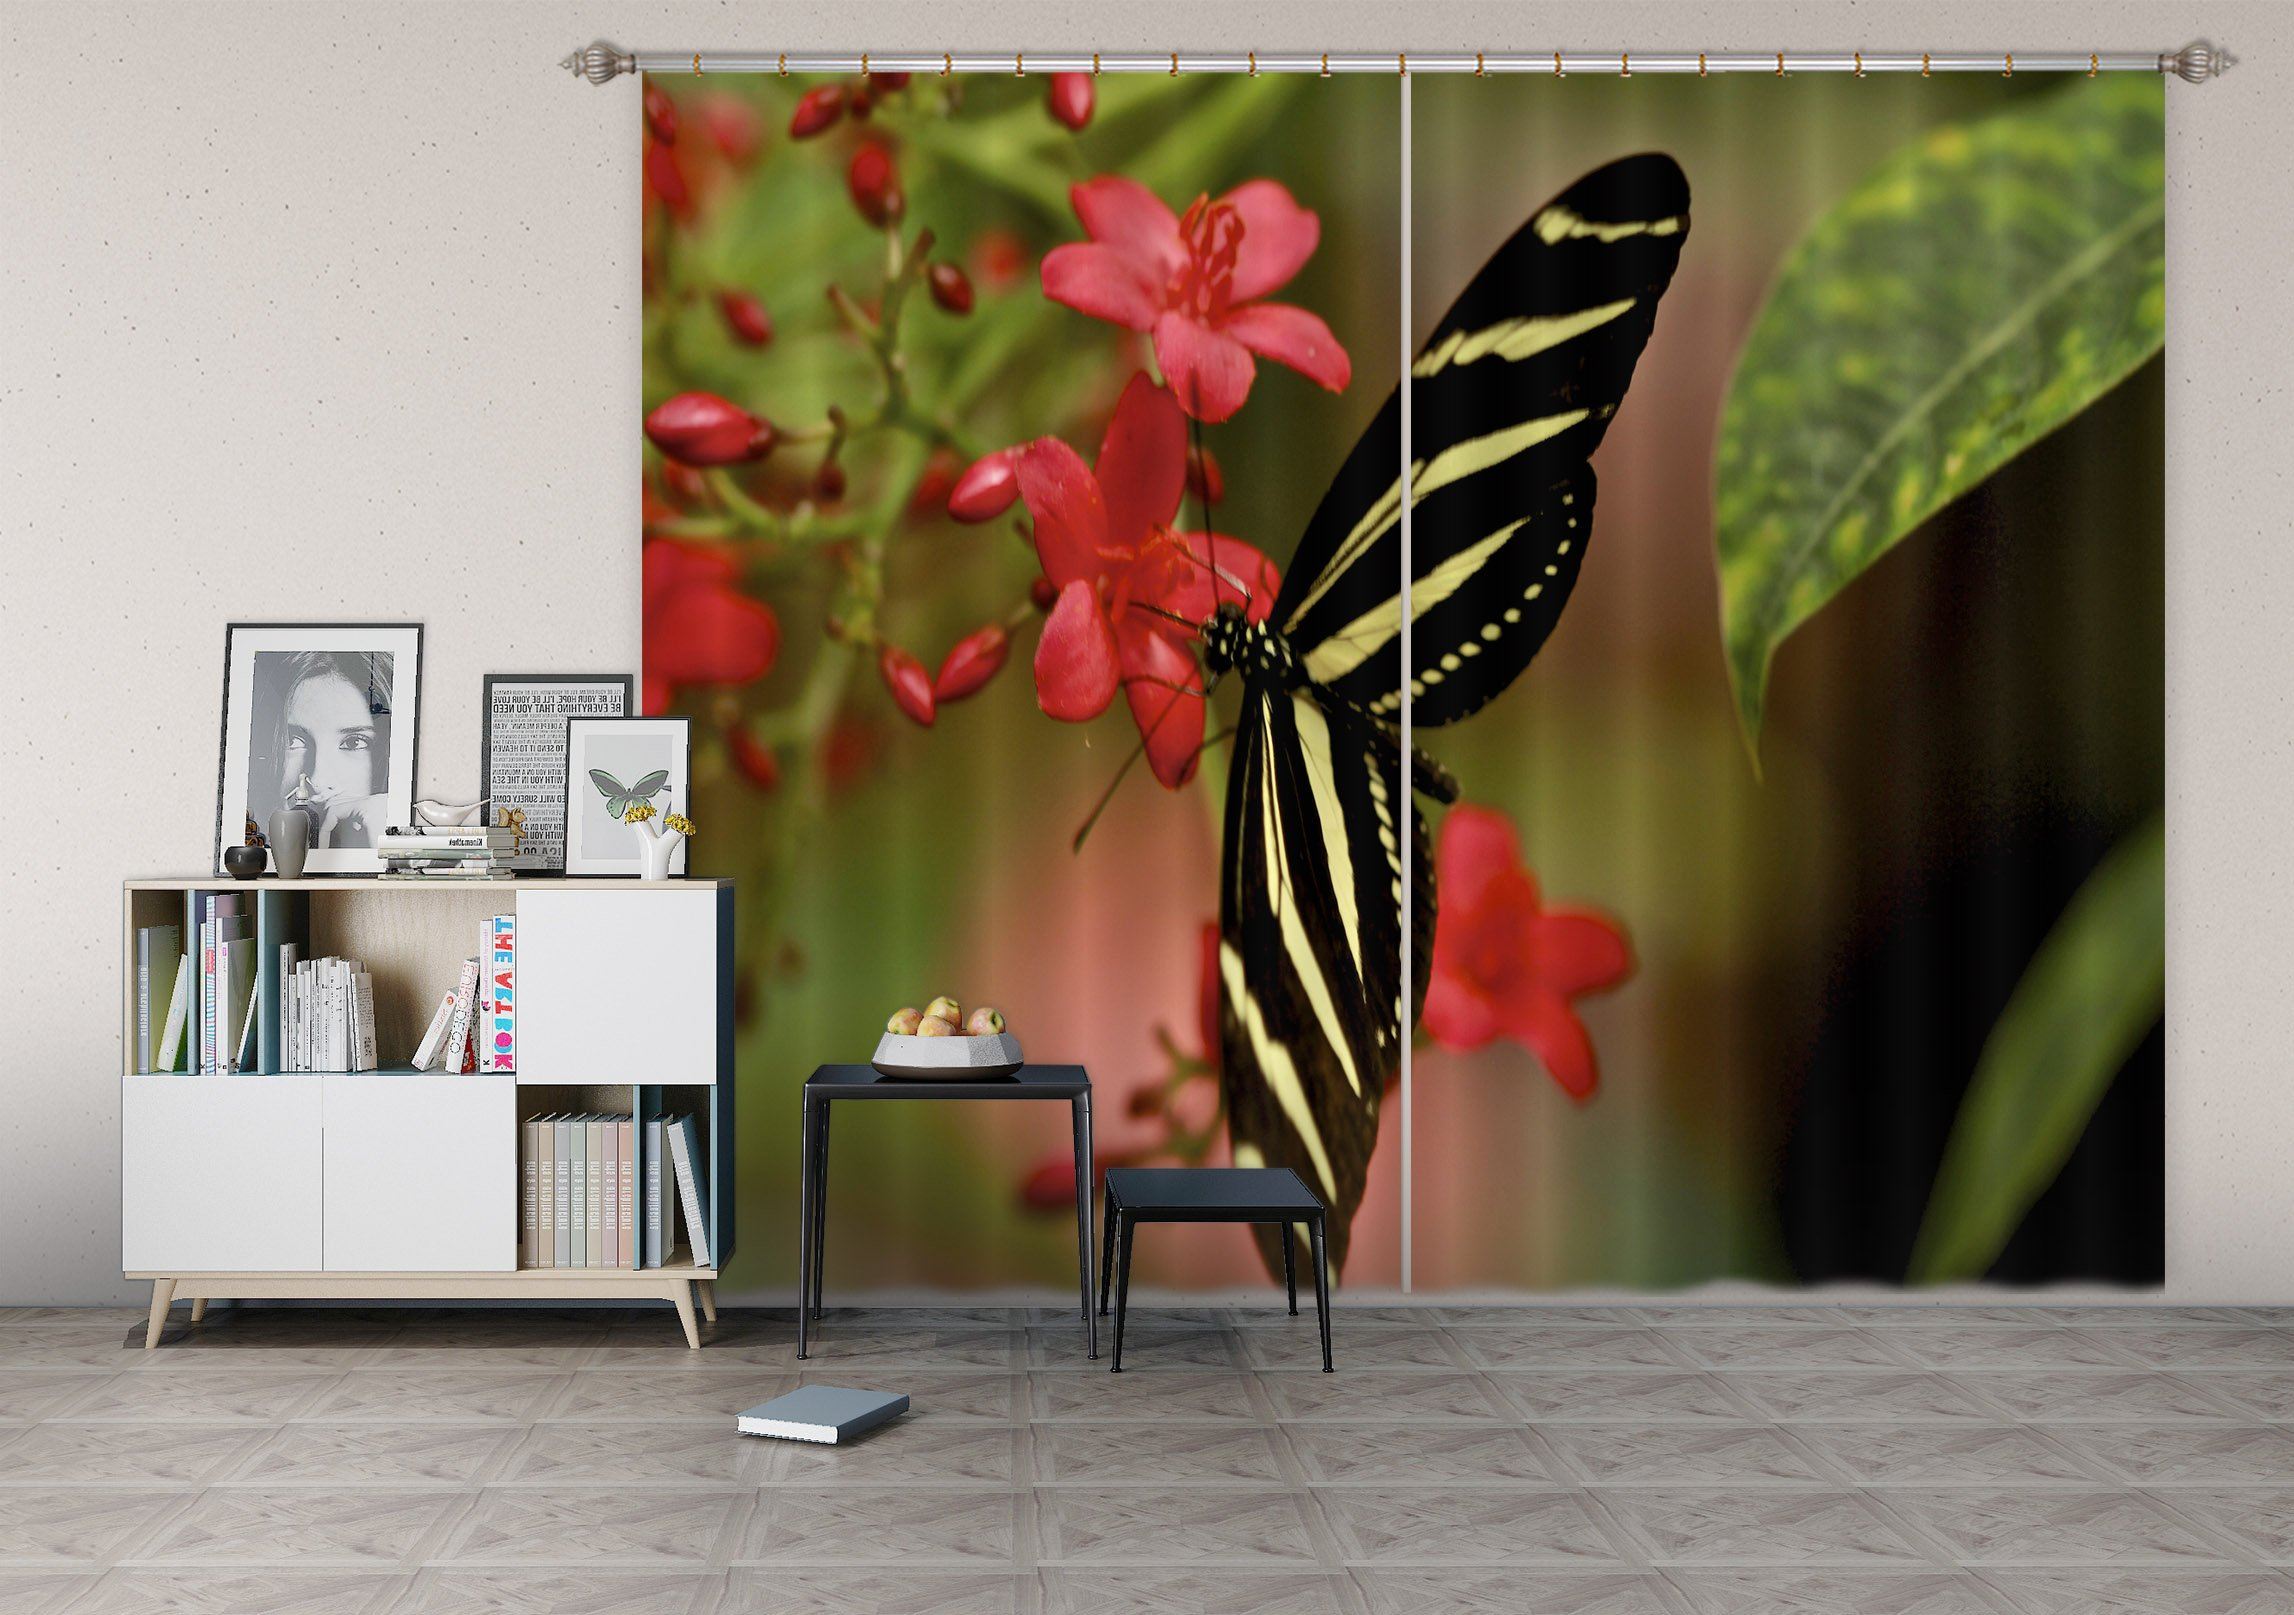 3D Butterfly Collecting Honey 079 Kathy Barefield Curtain Curtains Drapes Curtains AJ Creativity Home 